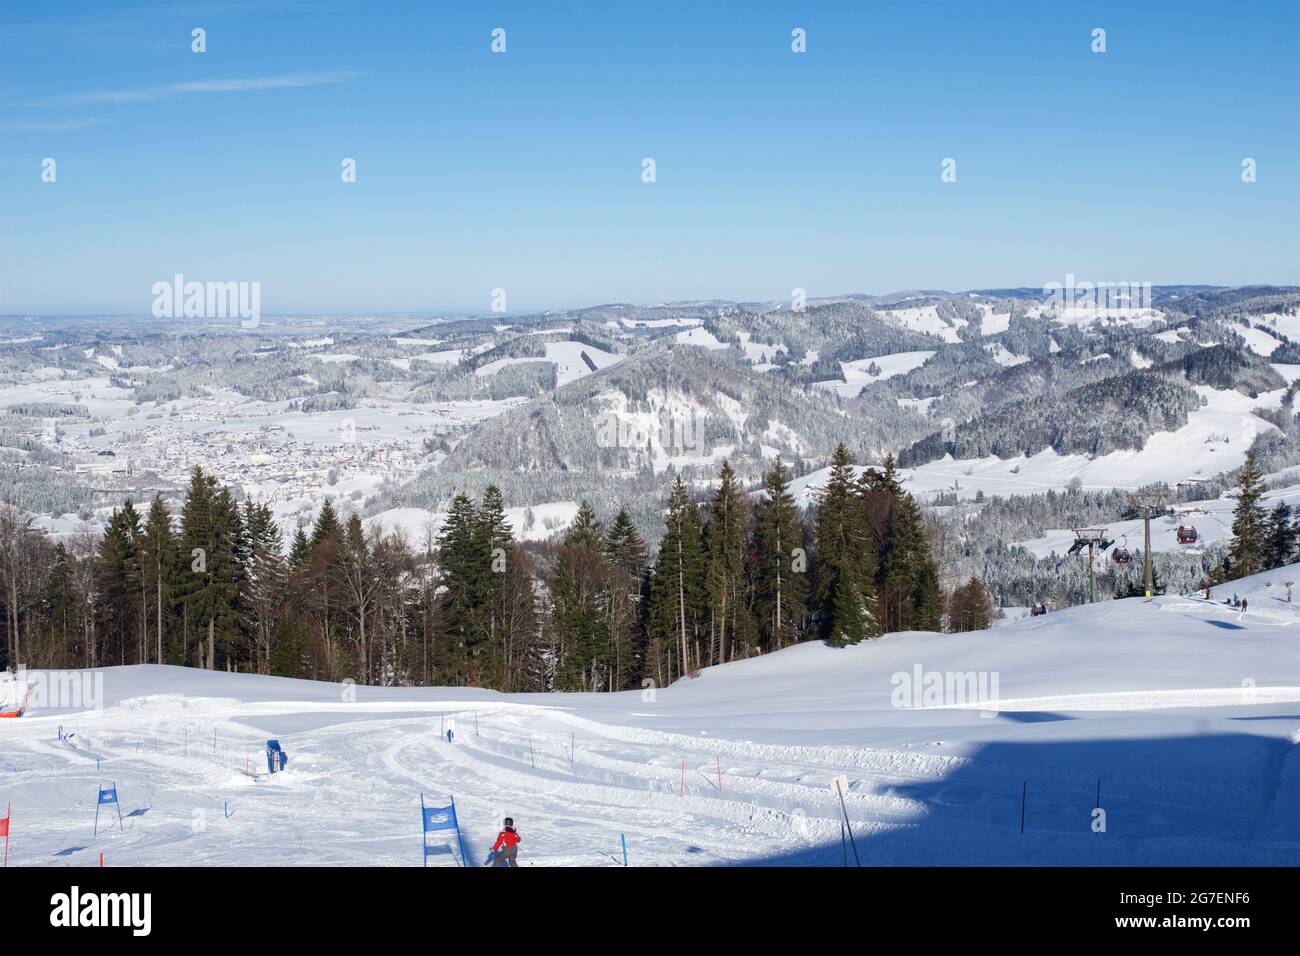 OBERSTAUFEN, GERMANY - 29 DEC, 2017: Wonderful view of the snowy winter resort Oberstaufen in the Bavarian Alps with ski slope and skiers in the Stock Photo